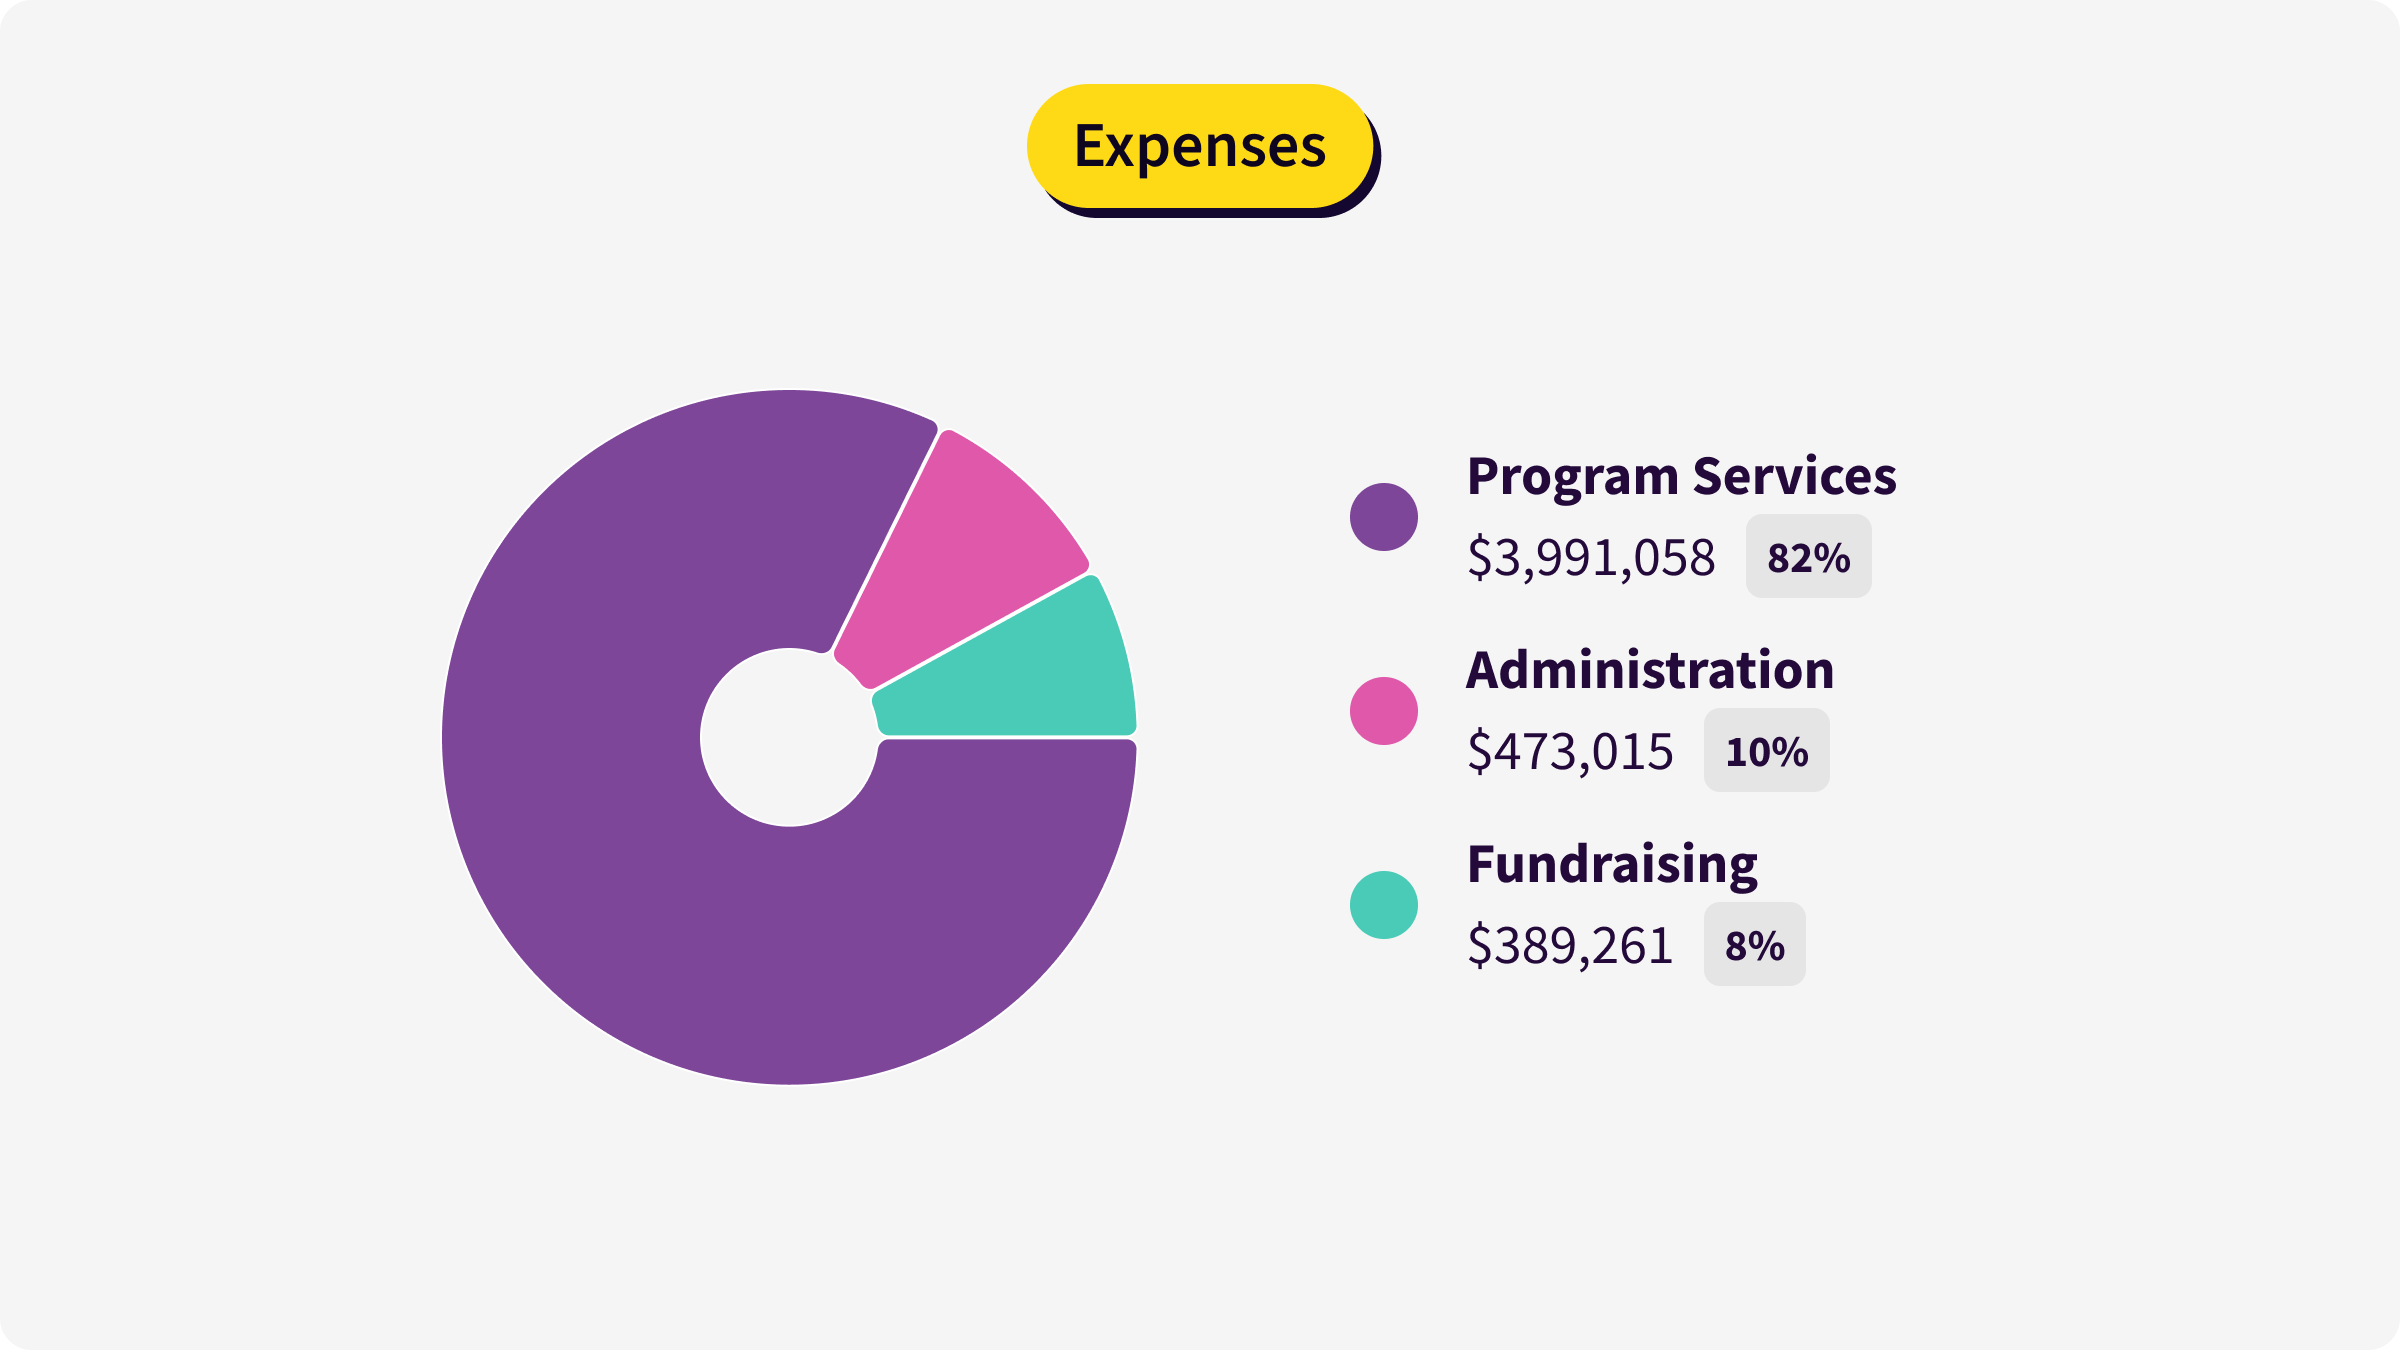 Pie chart visualizing the breakdown of expenses